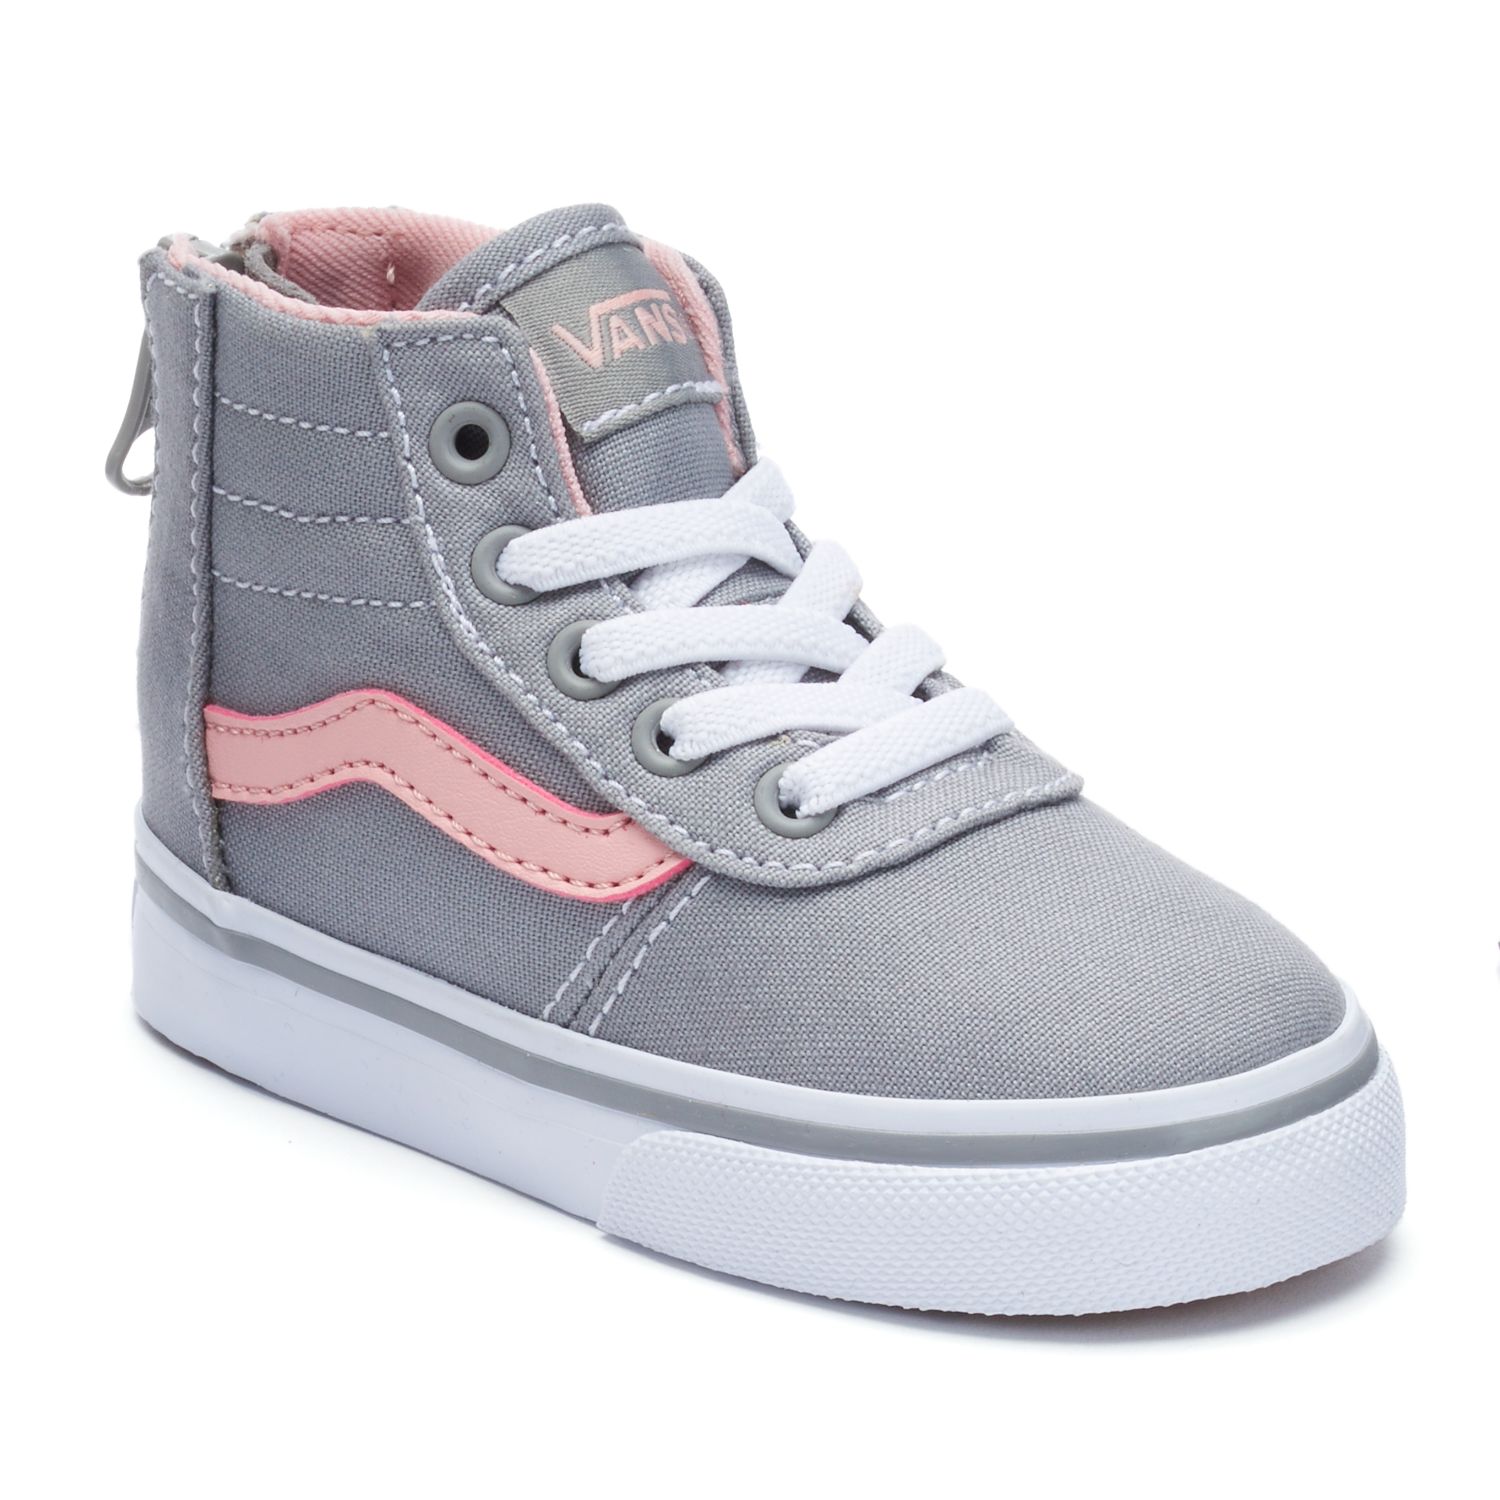 gray and pink high top vans